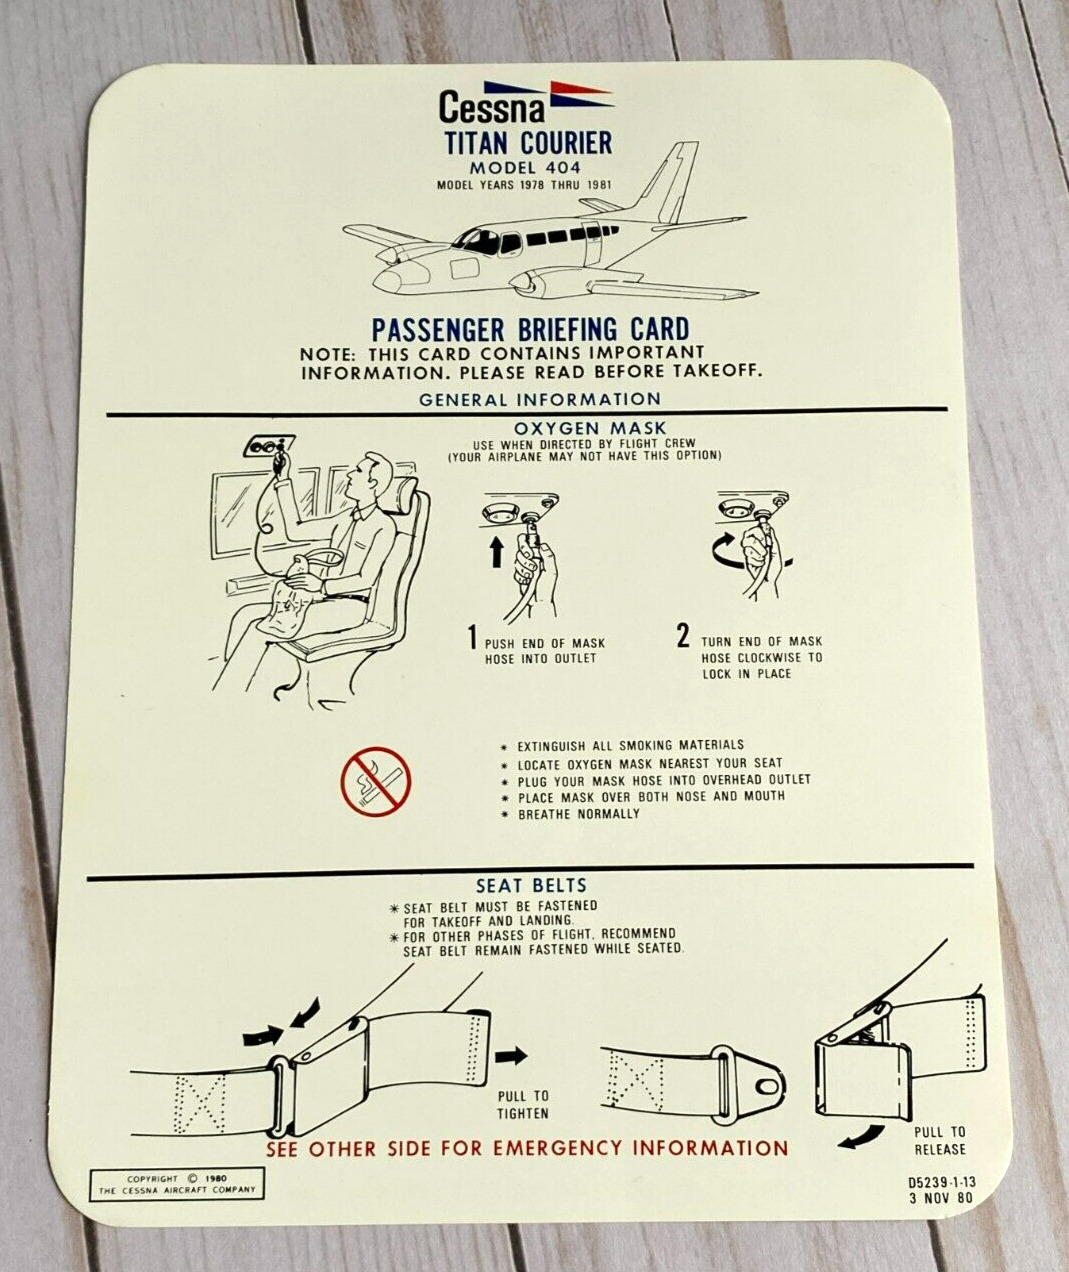 Cessna Titan Courier Model 404 Safety Card - 11/80